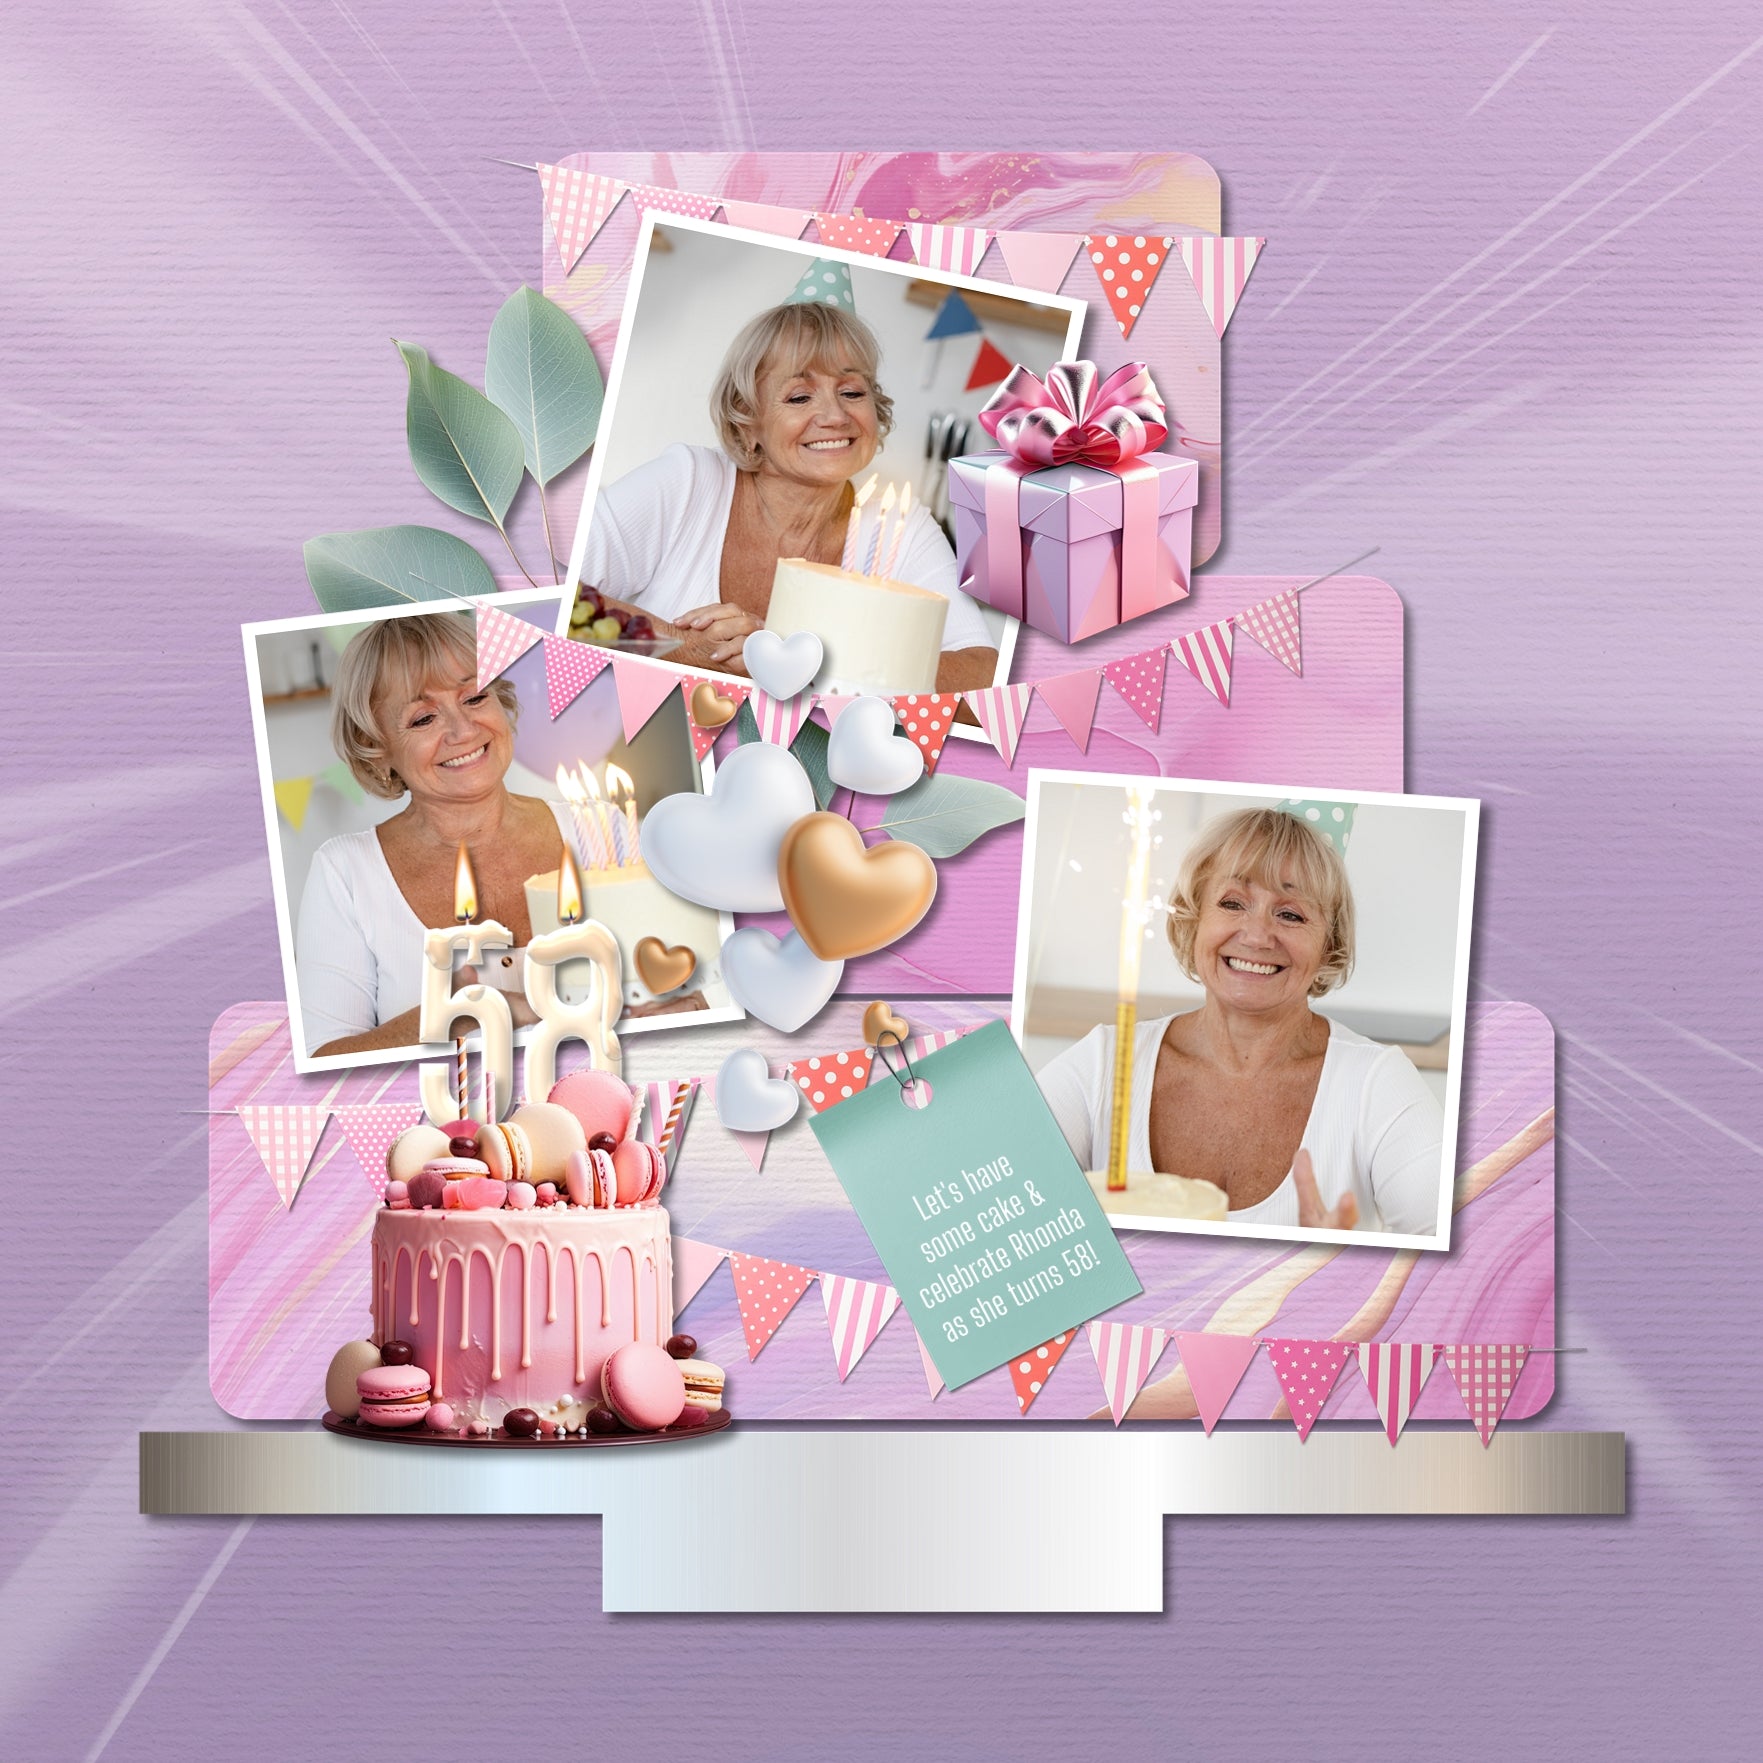 Enjoy the memories created with your girlfriends as you celebrate your birthdays together. This fun and feminine digital scrapbooking embellishments and papers kit by Lucky Girl Creative Digital Art will help you tell your story and bring a smile to your face as you recall your favorite times together. 